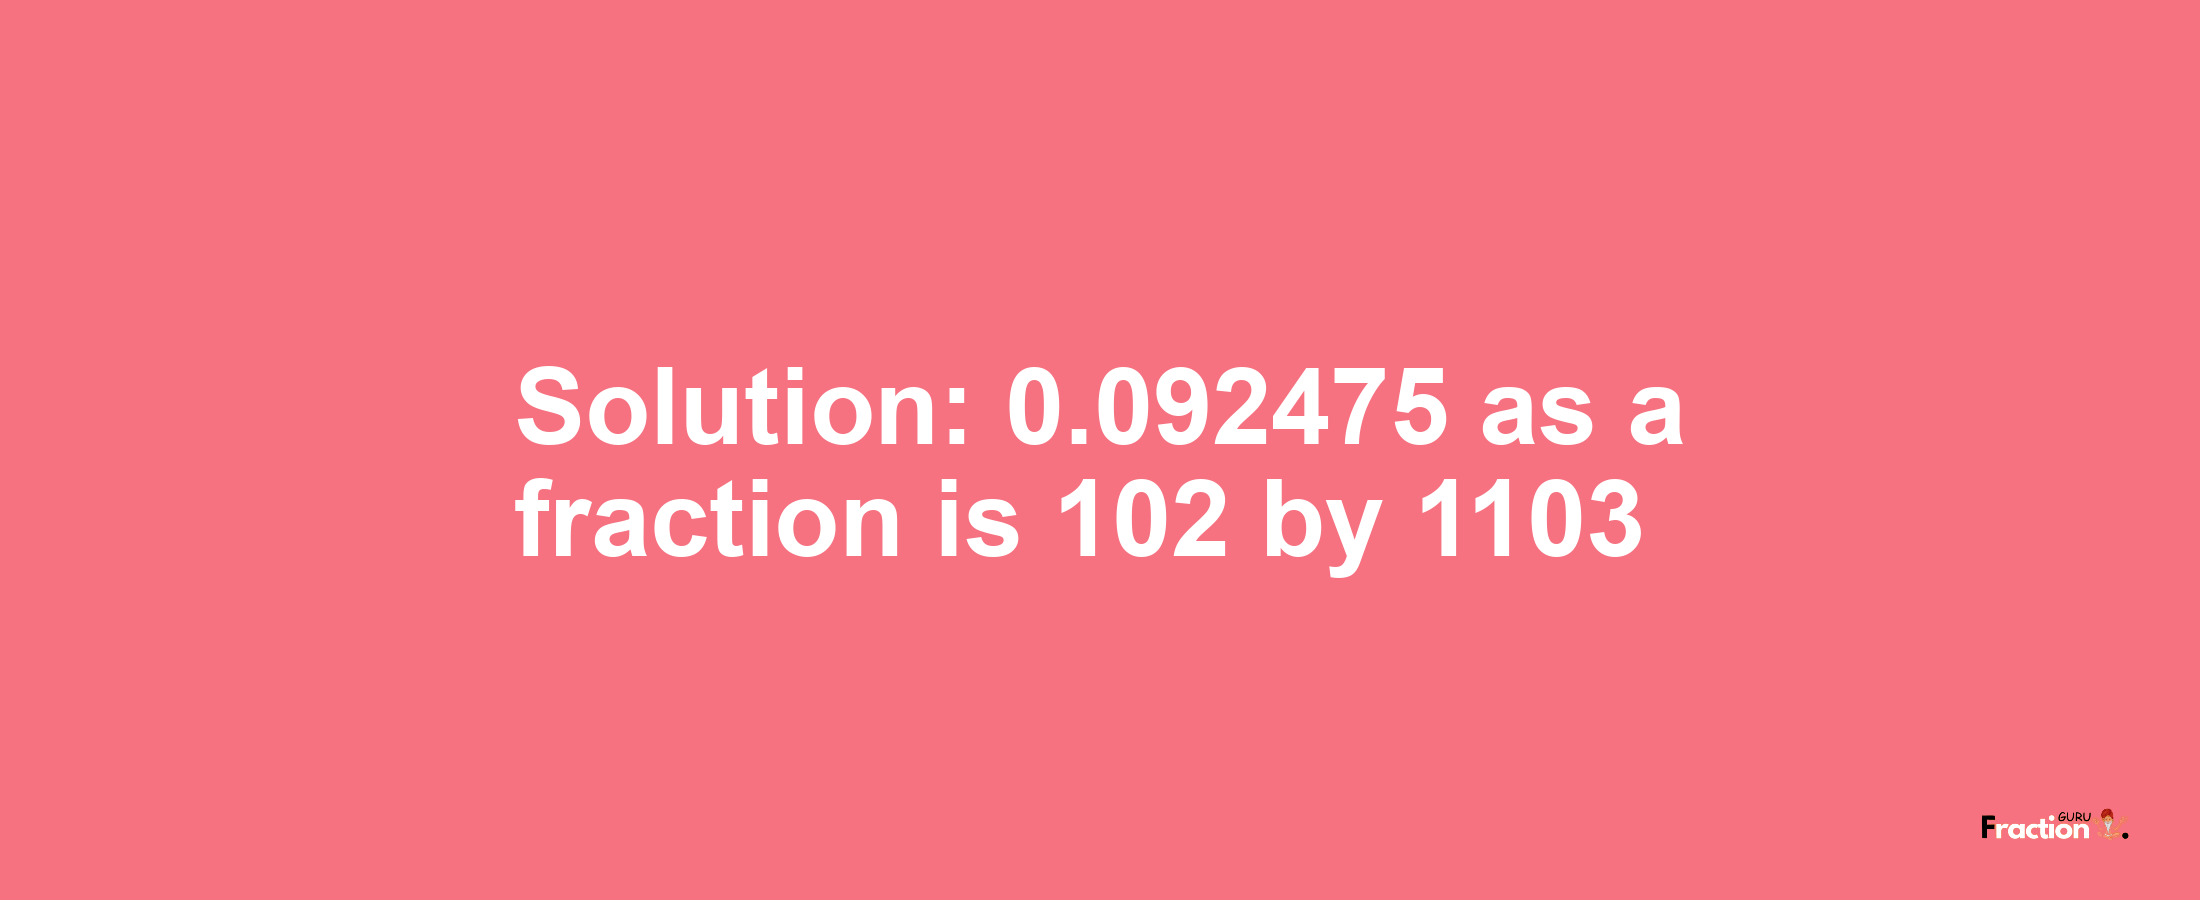 Solution:0.092475 as a fraction is 102/1103